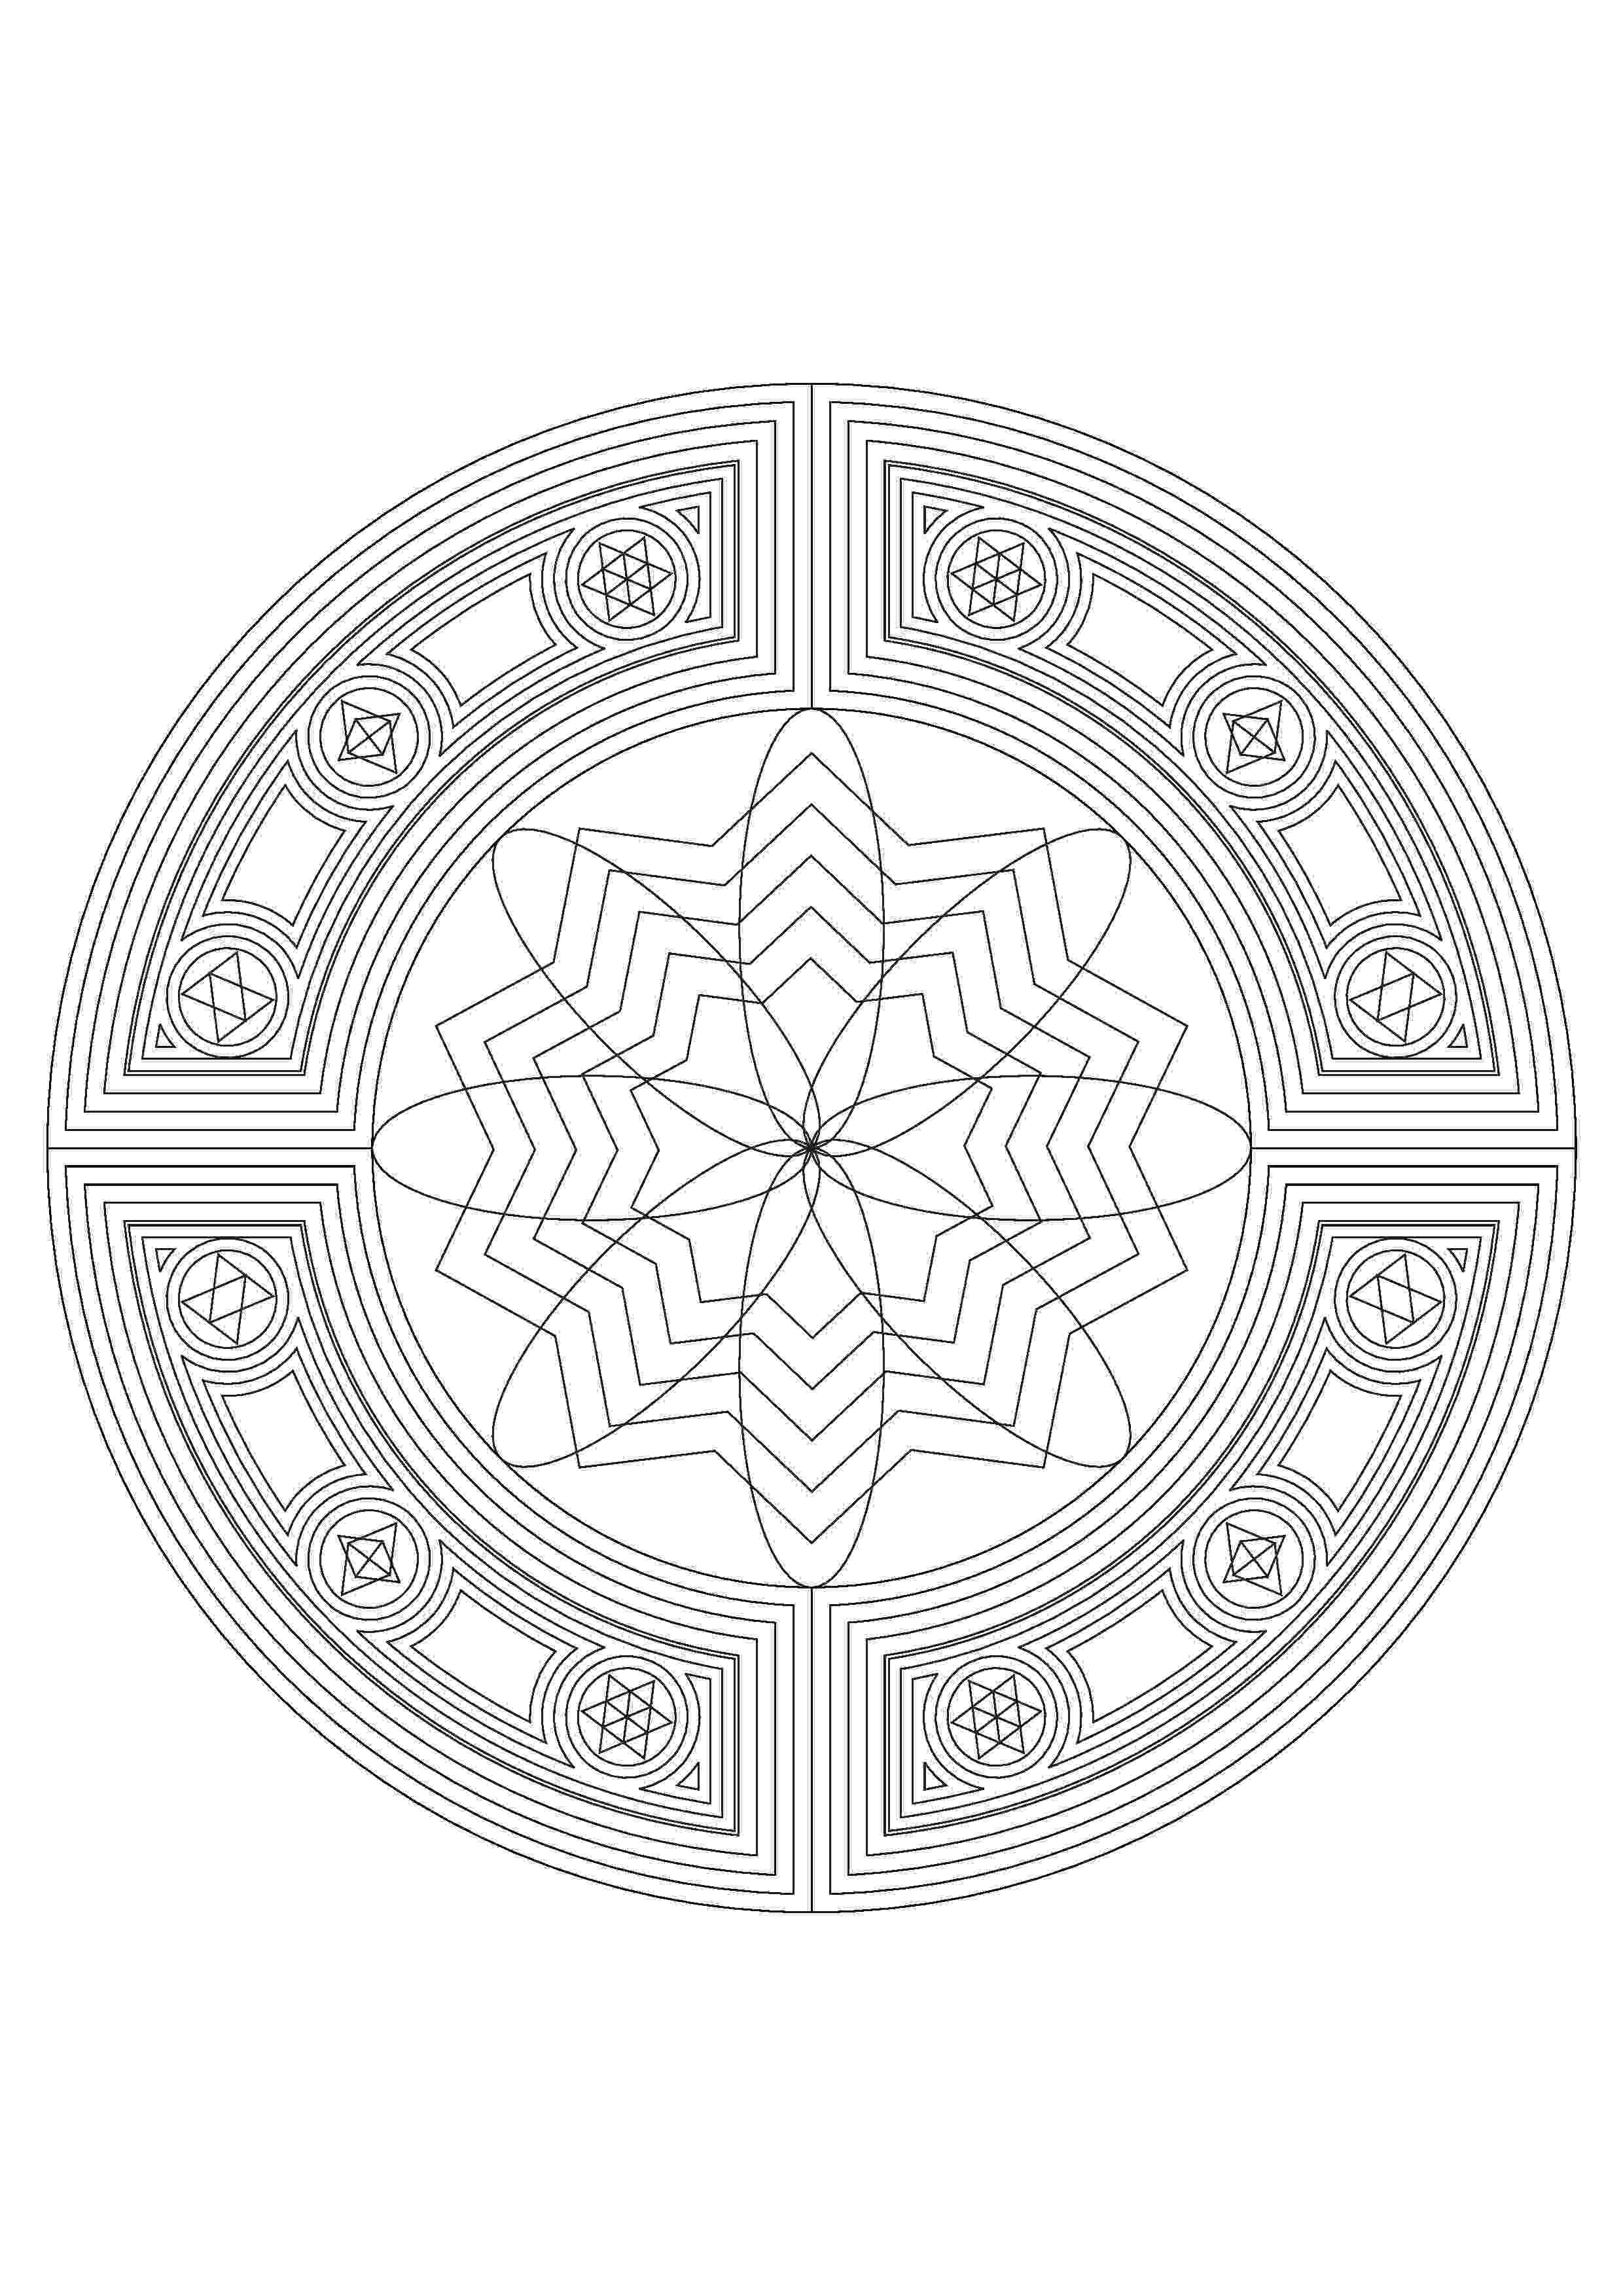 mandala coloring pages online beautiful free mandala coloring pages skip to my lou mandala coloring online pages 